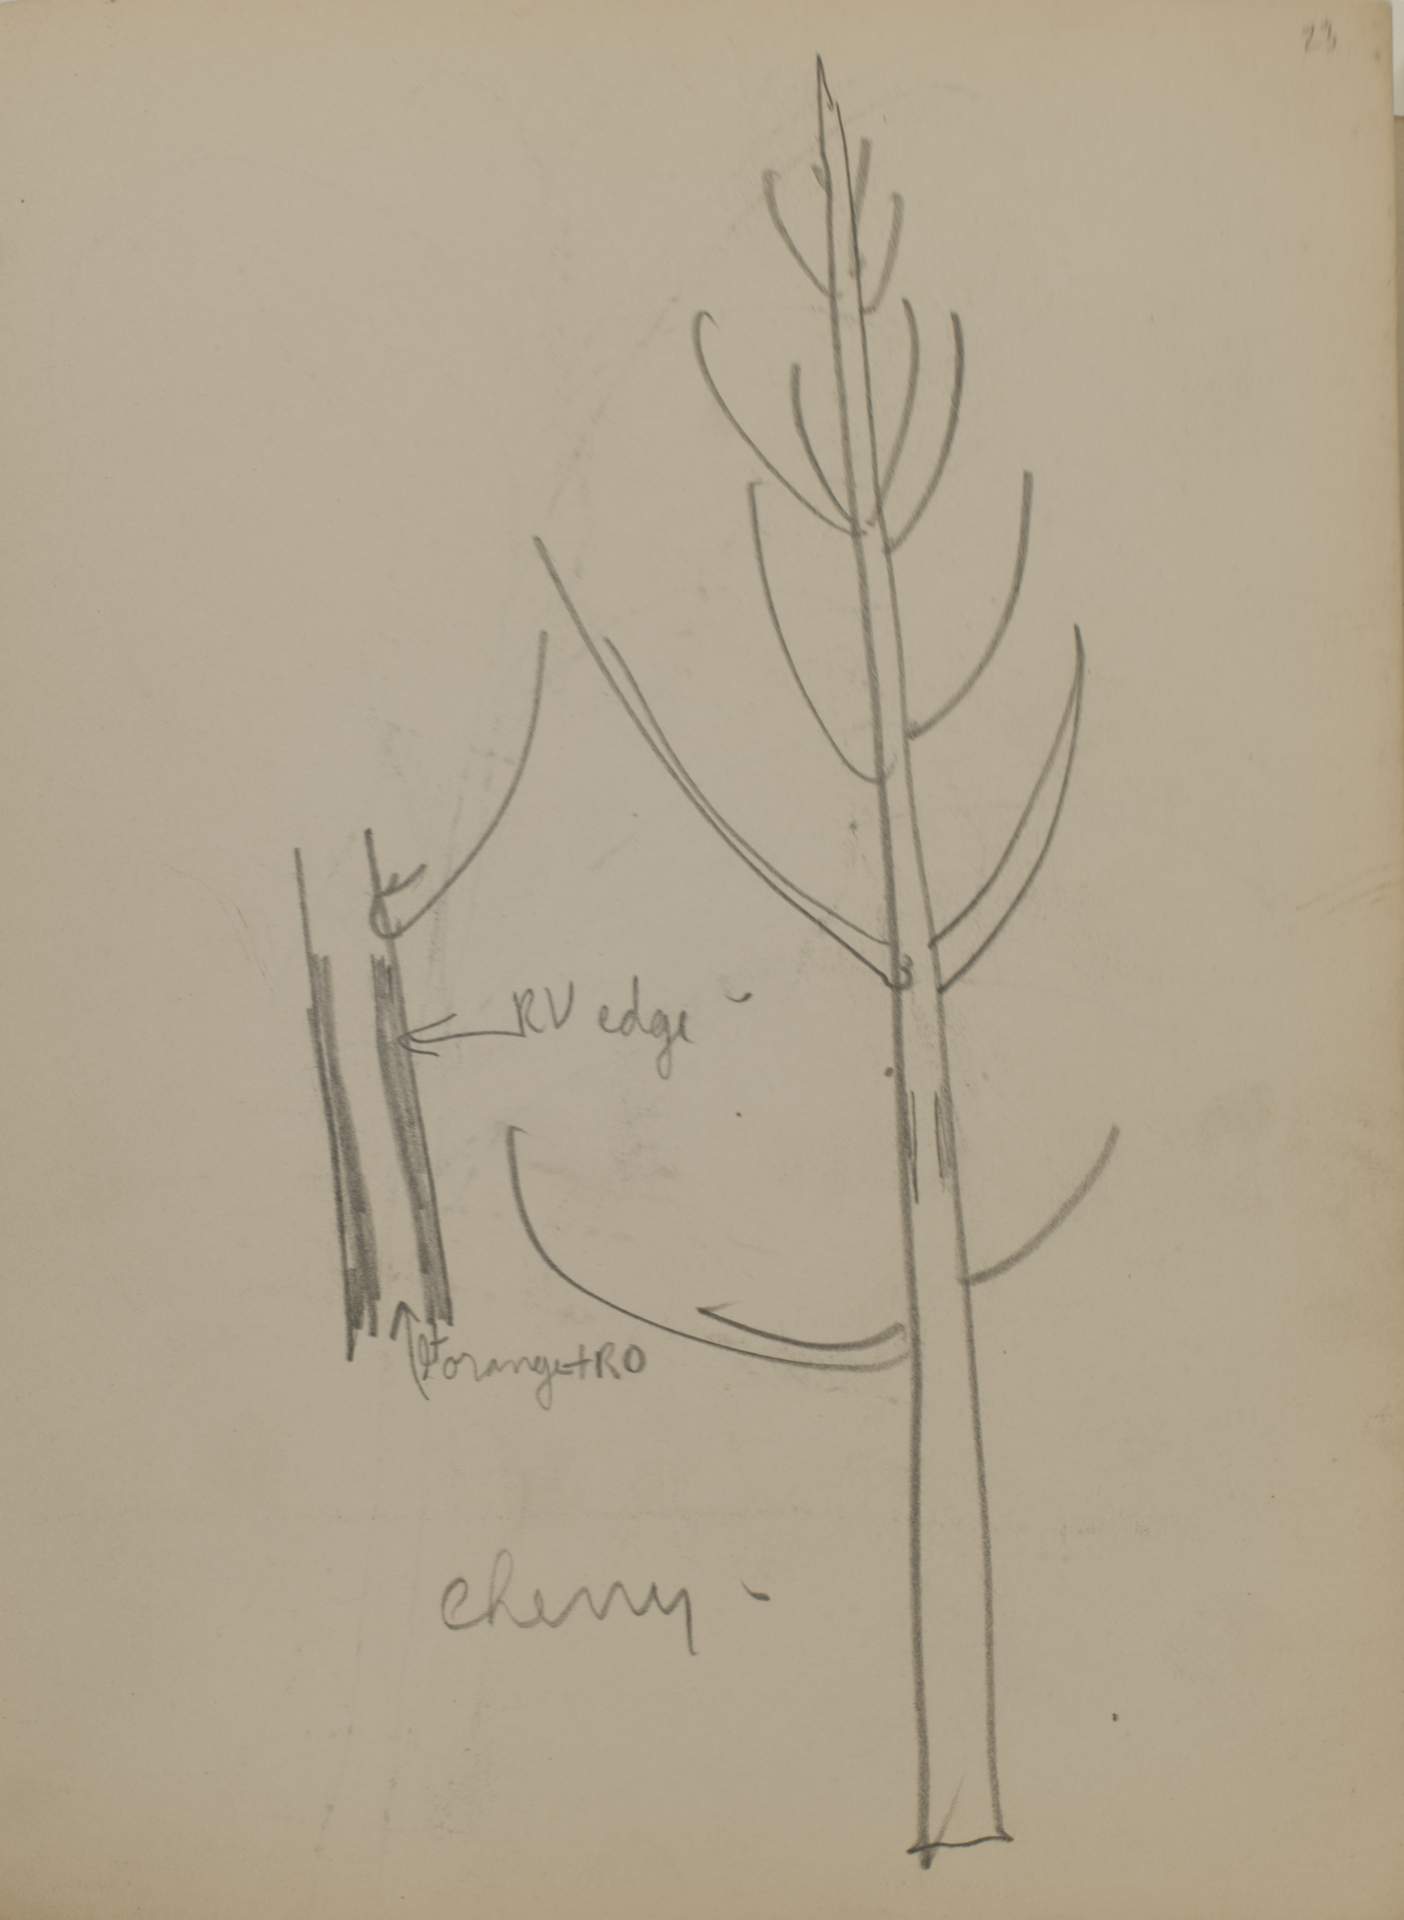 Untitled (sketch of tree)